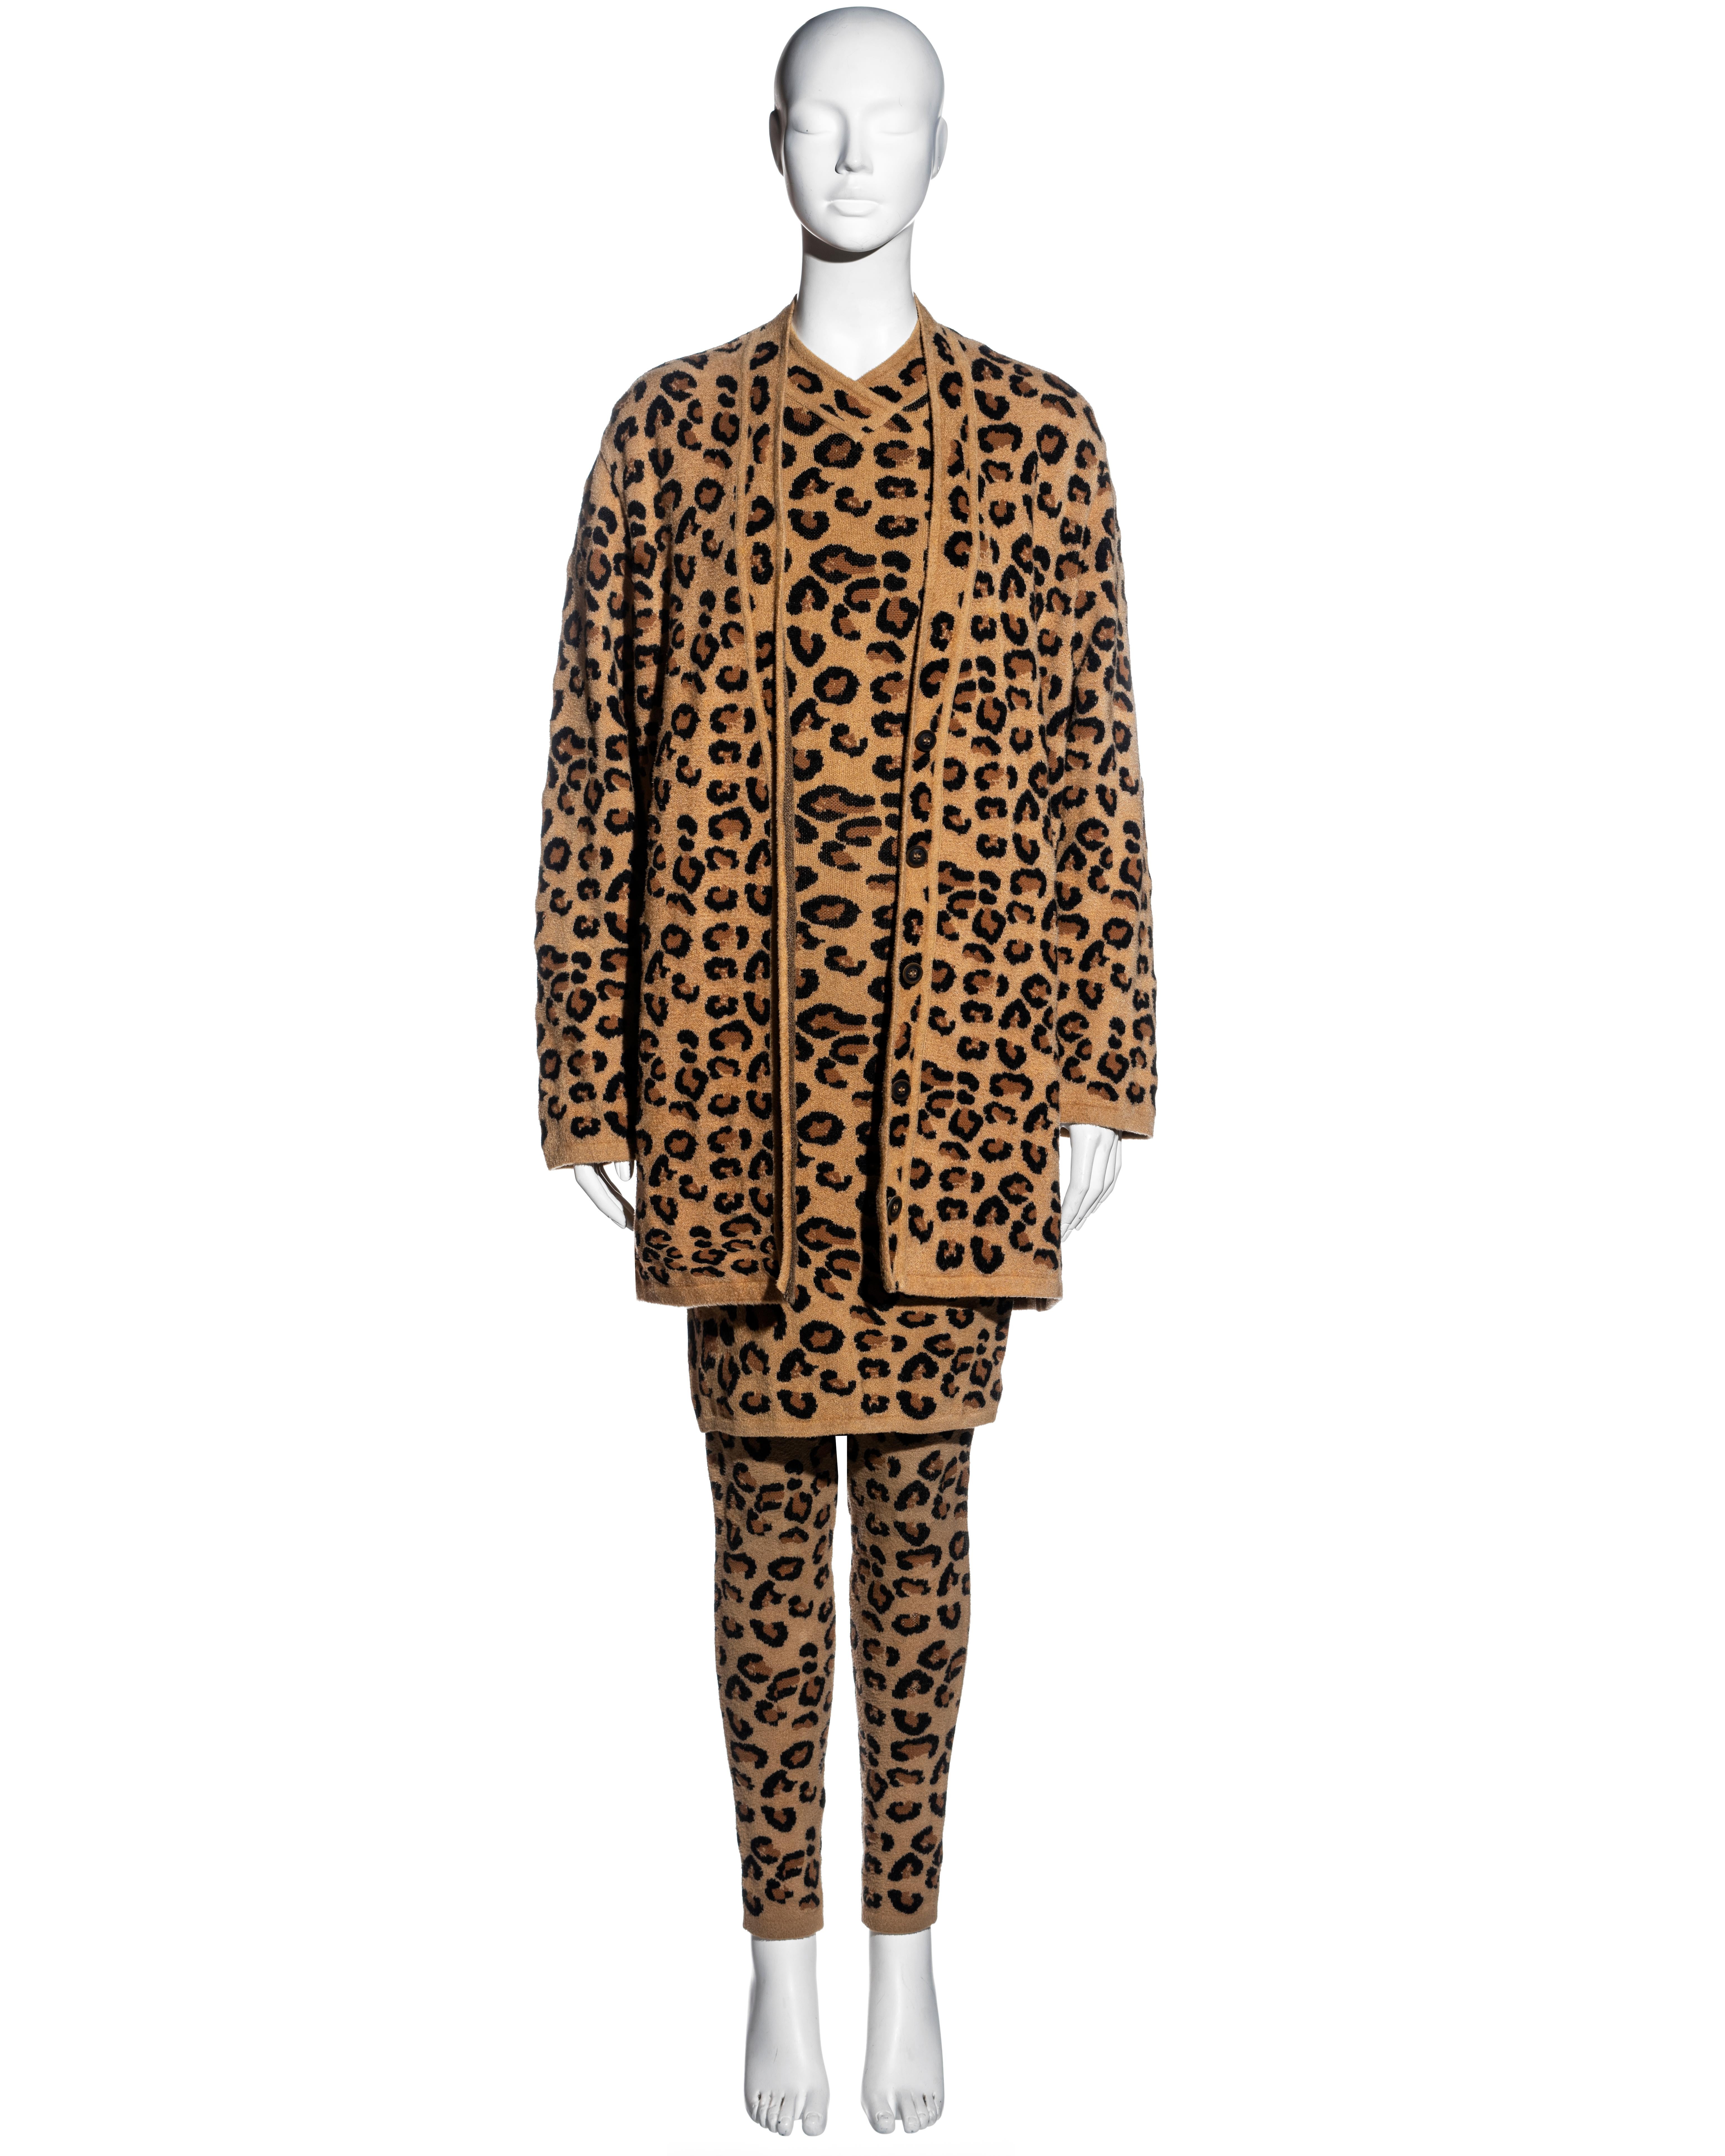 Azzedine Alaia leopard wool dress, cardigan, skirt and leggings set, fw 1991 In Excellent Condition For Sale In London, GB